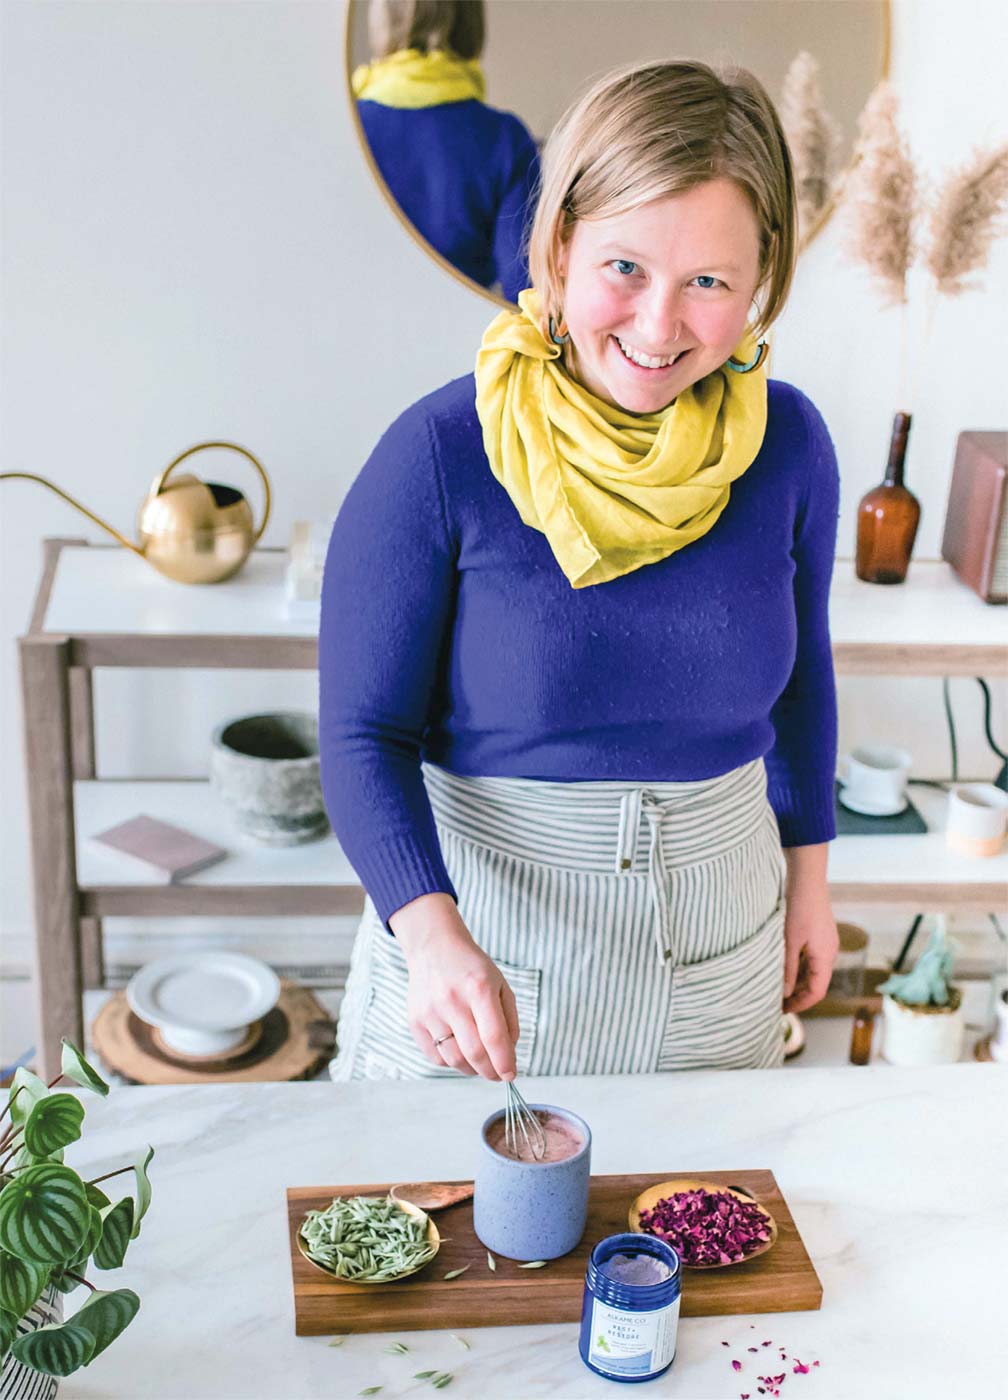 ALKAME CO owner Rachael Keener stirs up a warming brew featuring one of her herbal blends.